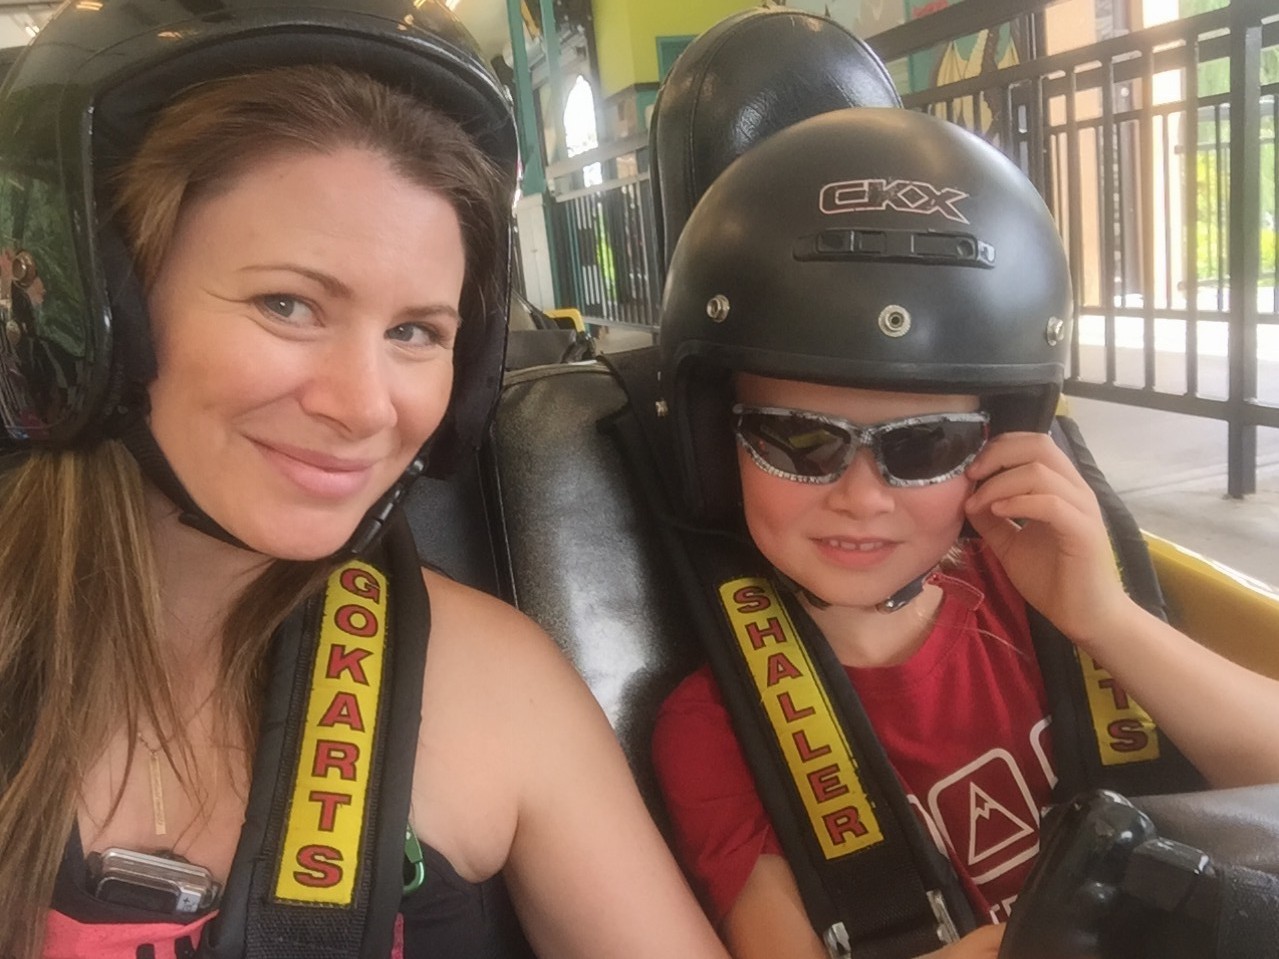 Go Cart Races at Castle Fun Park in Abbotsford with #ExploreBCbyBus